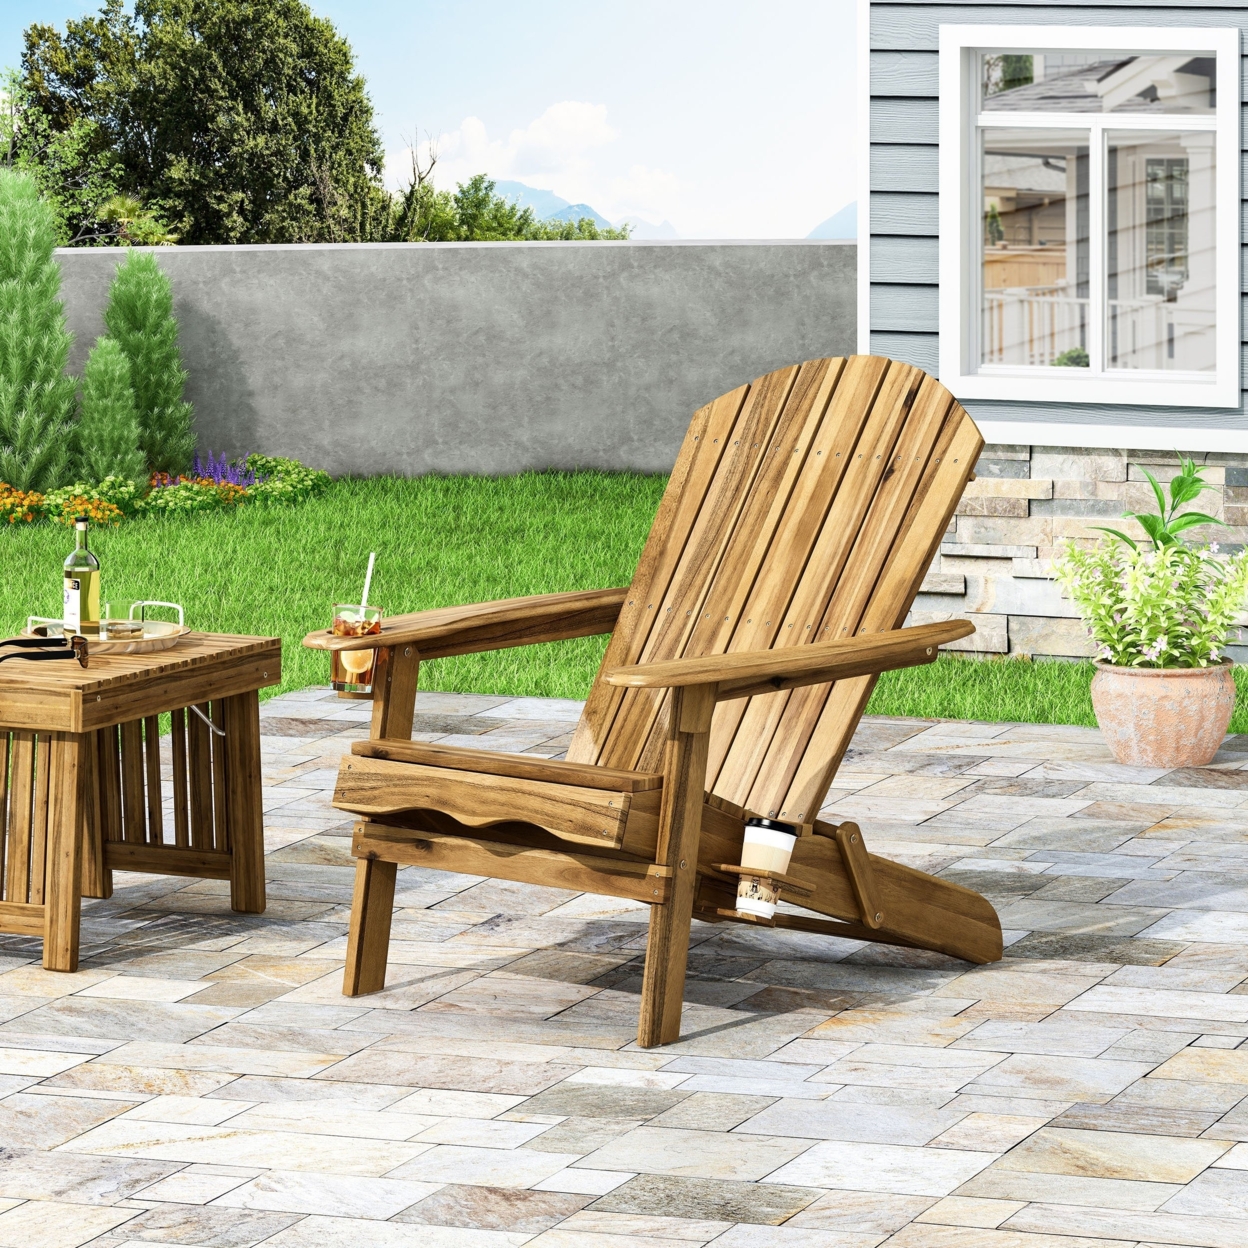 Kandyce Outdoor Acacia Wood Folding Adirondack Chair With Cup Holder - Natural